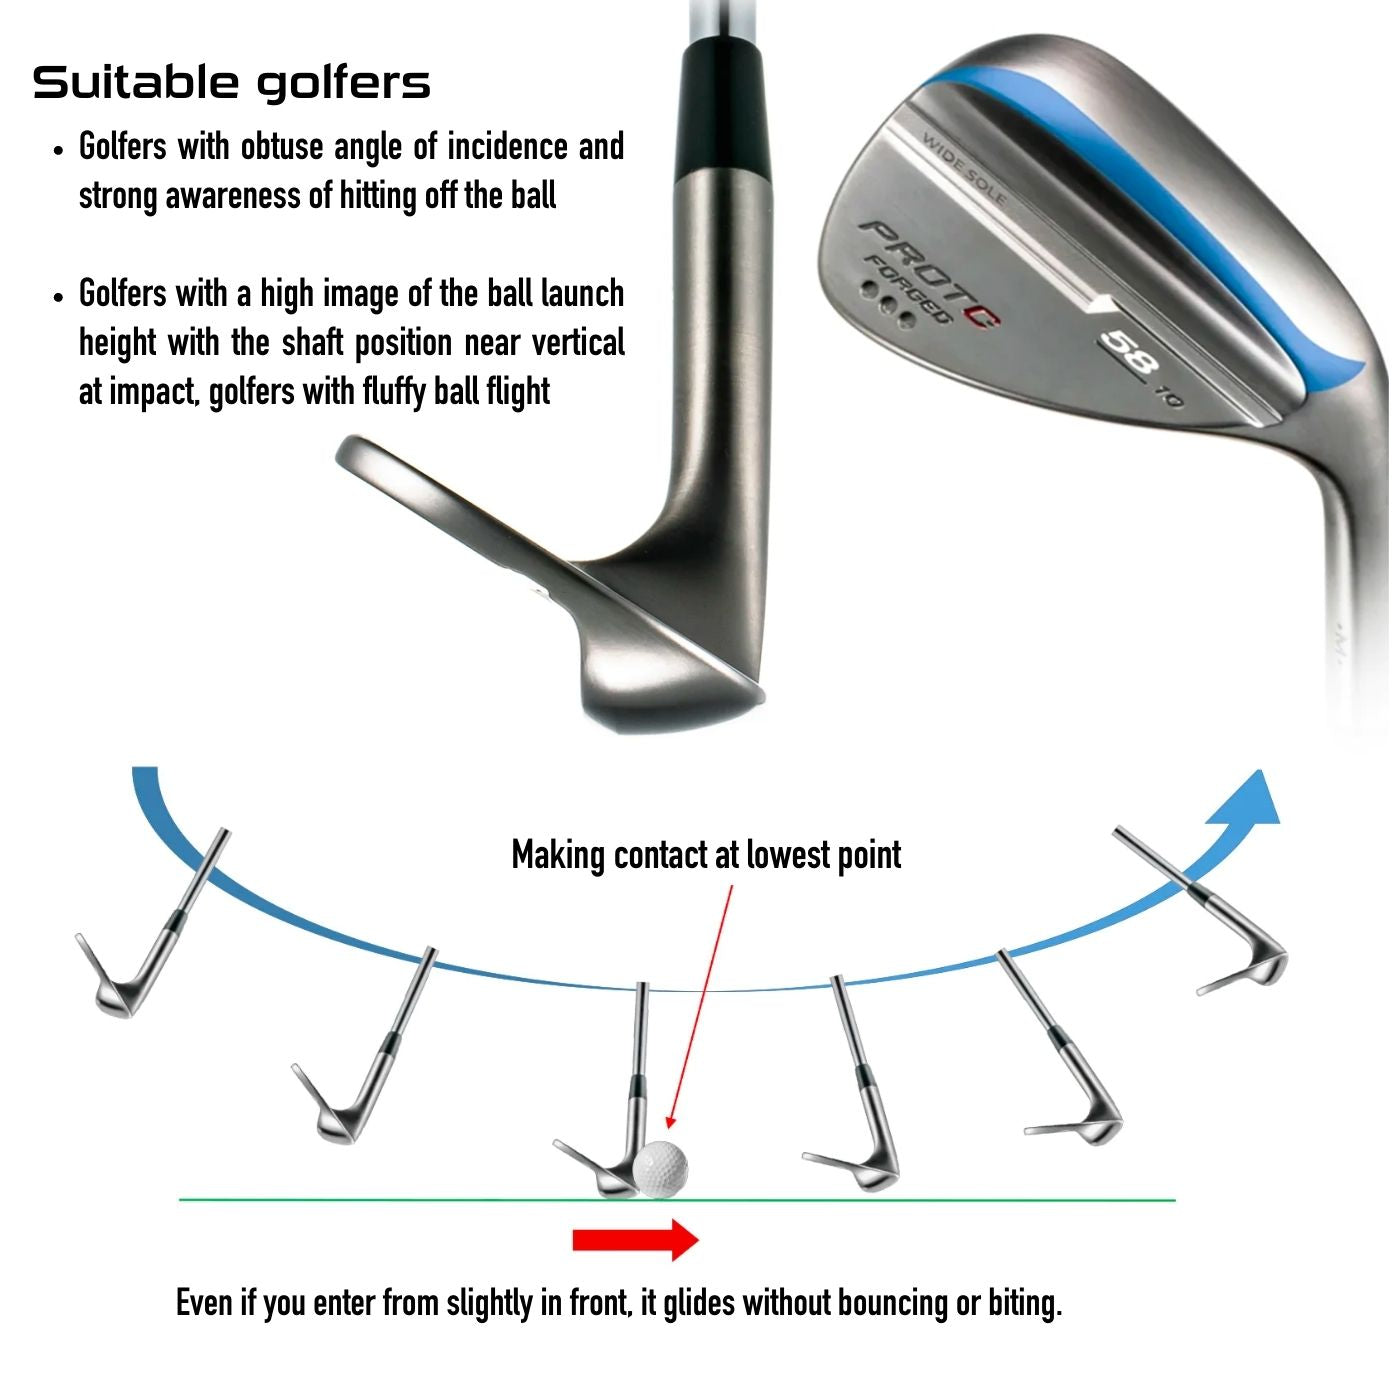 PROTOCONCEPT Golf, Protoconcept Wedge, Golf Wedge, Forged wedge, wedge texhnology